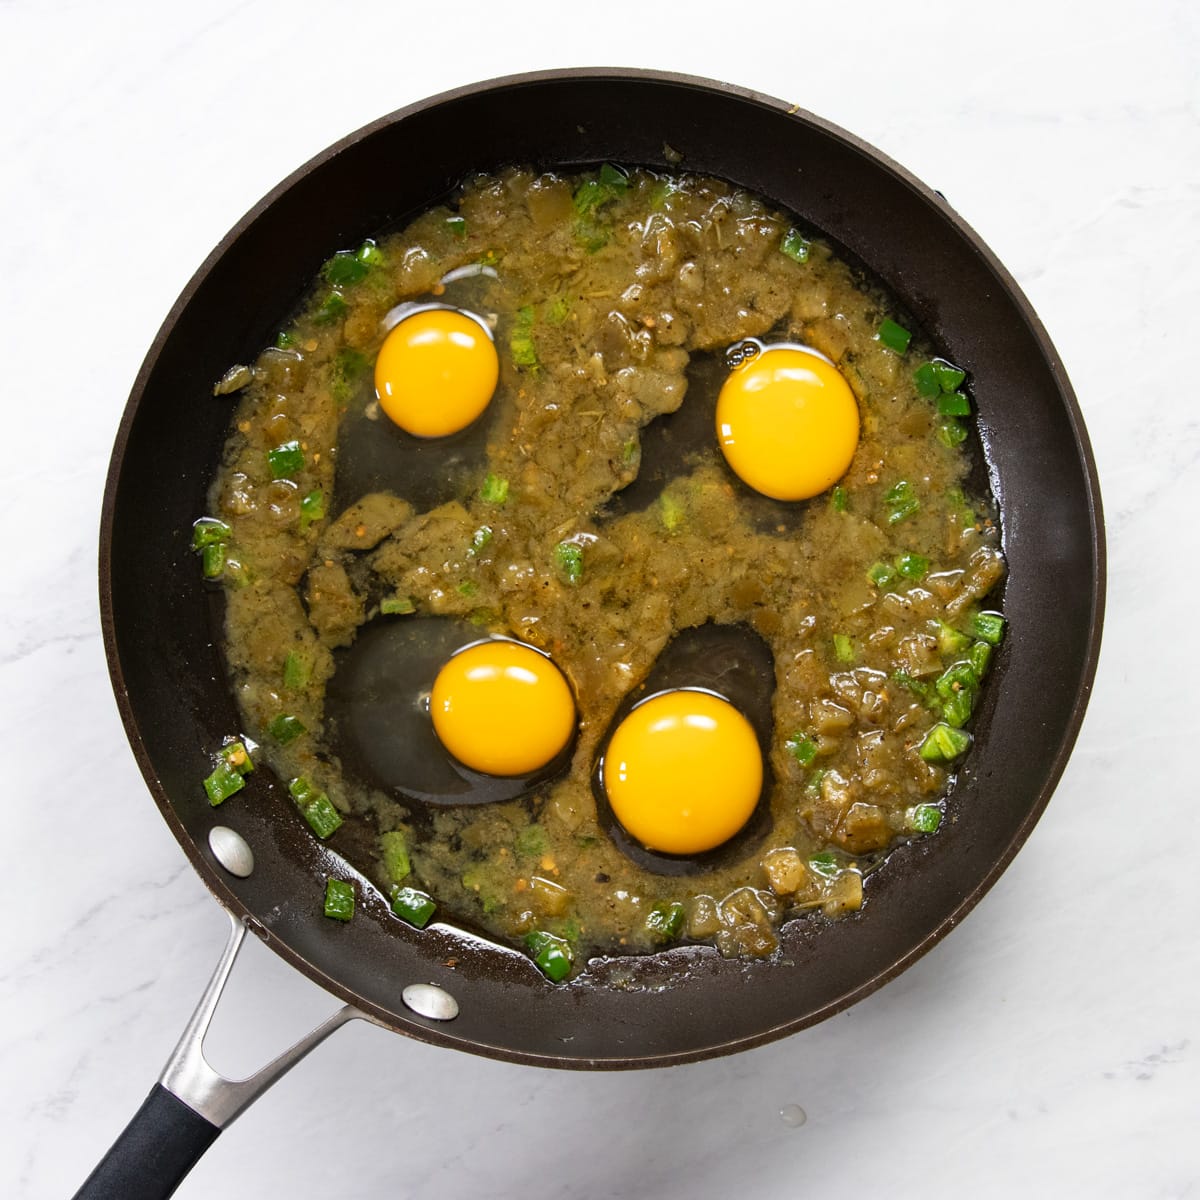 A skillet with four raw eggs cracked into salsa verde ready to be steam-cooked.